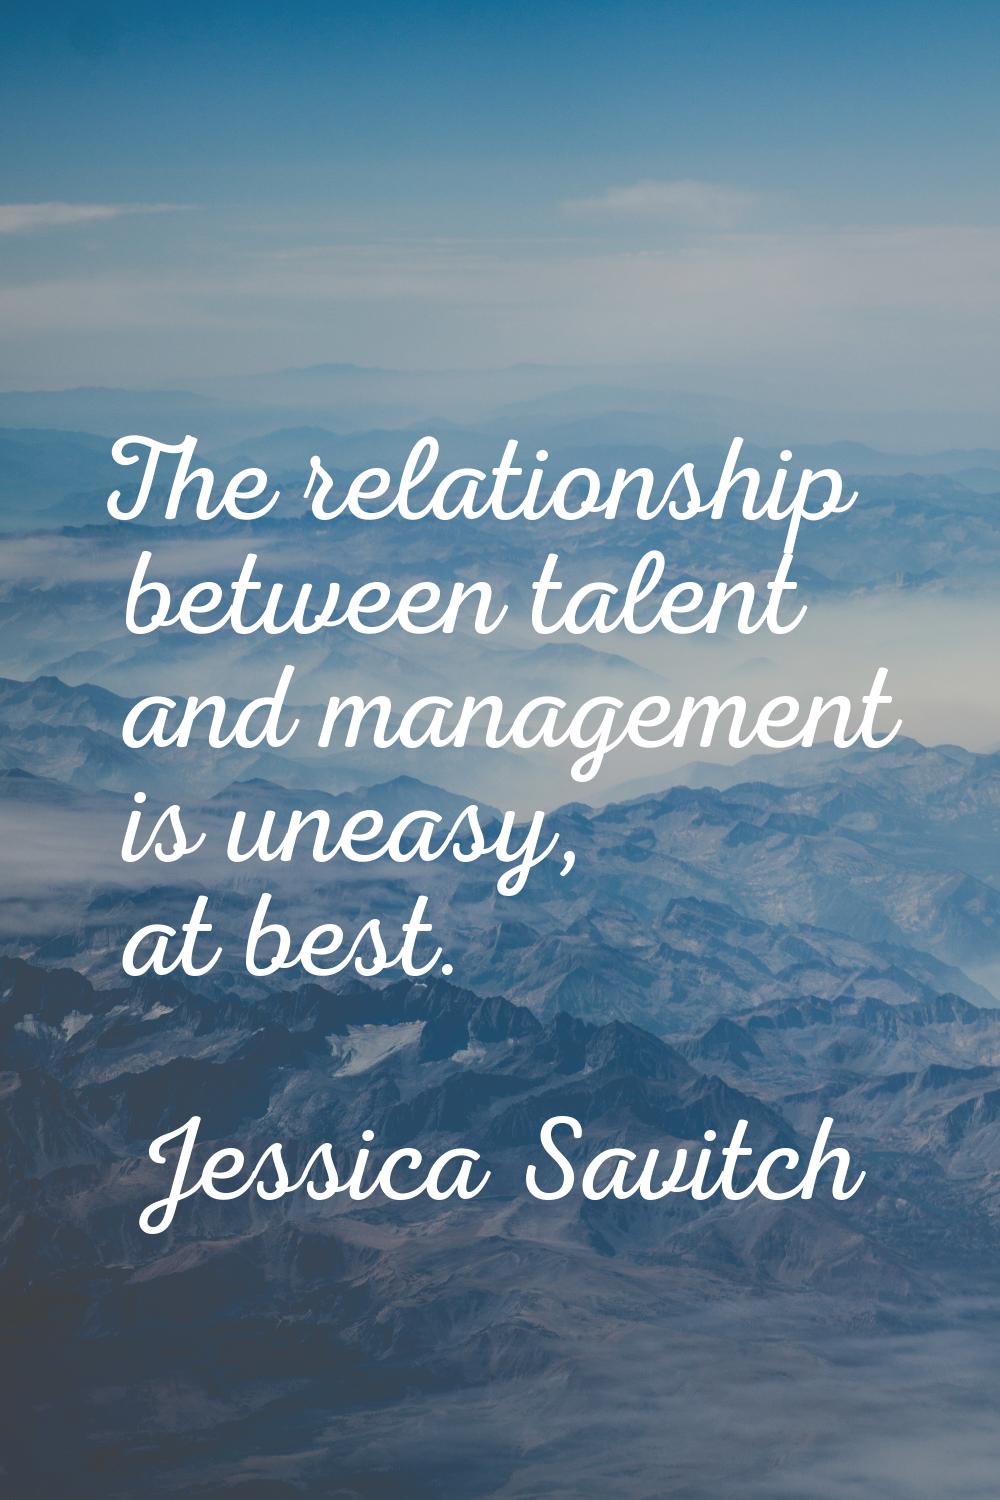 The relationship between talent and management is uneasy, at best.